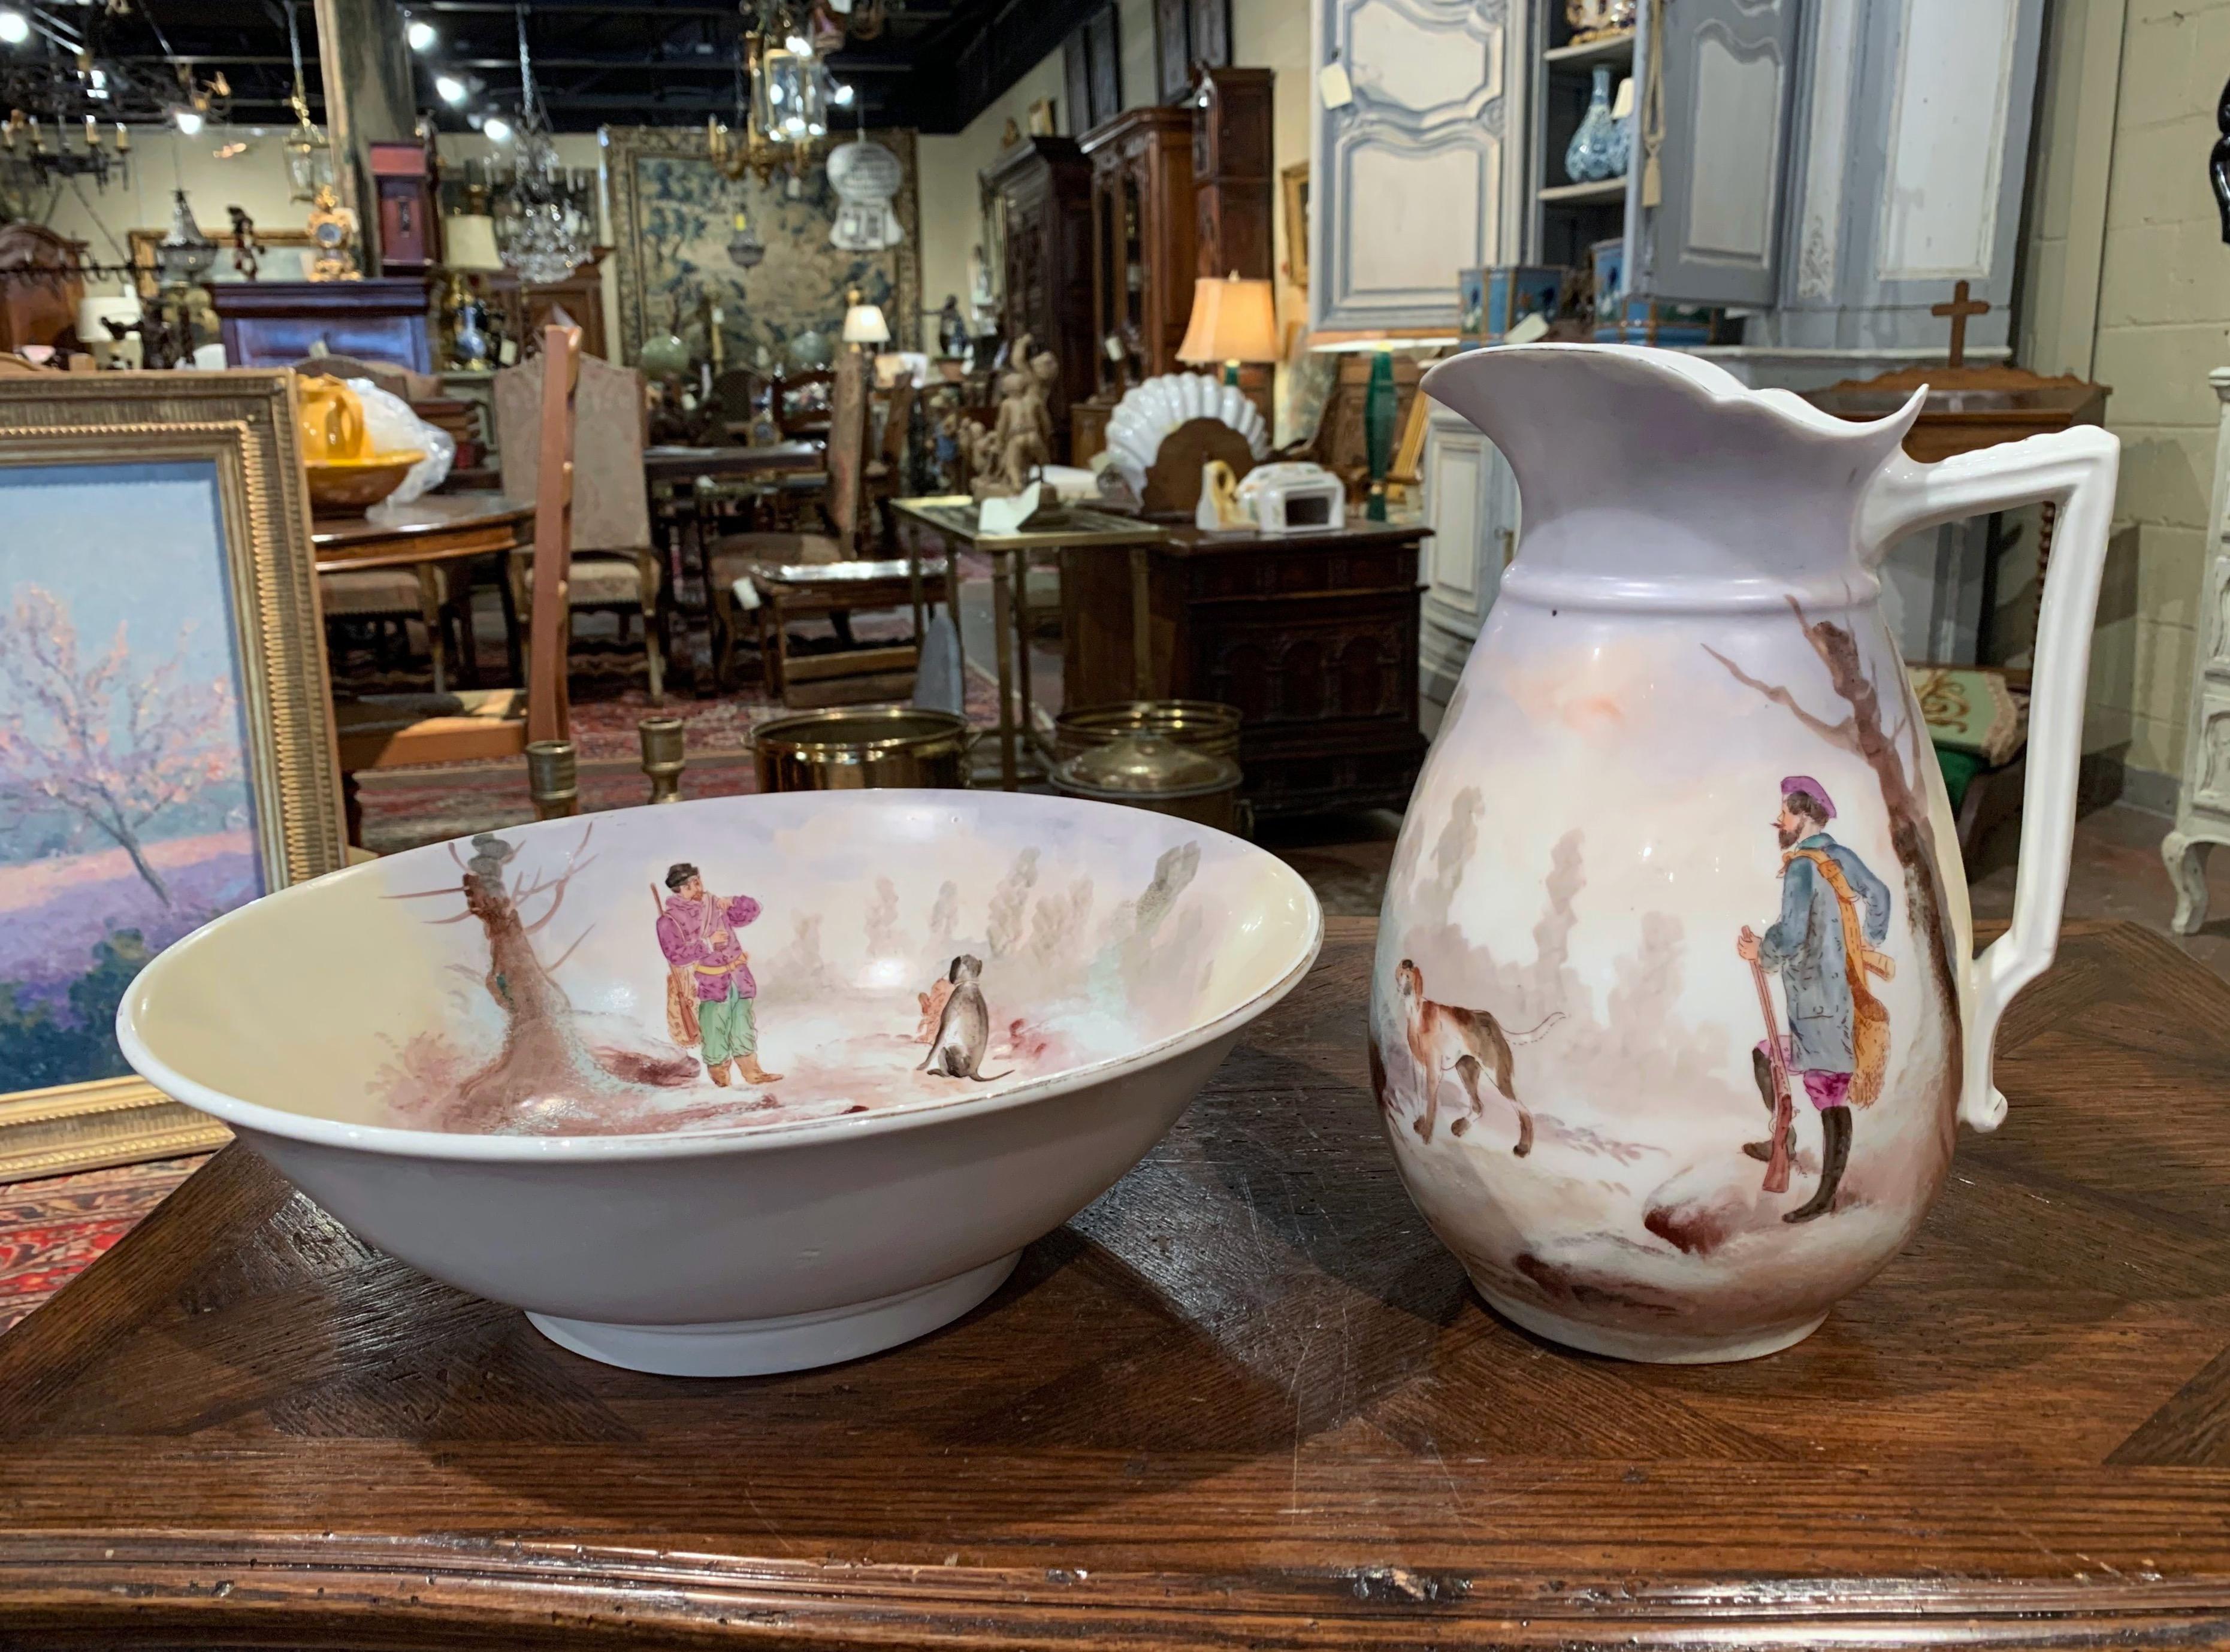 This elegant antique water pitcher with matching bowl were crafted in France, circa 1890; typically used to freshen up in the morning, the ceramic set features a hand painted hunting scene. The basin and pitcher are both depicting a typical hunt